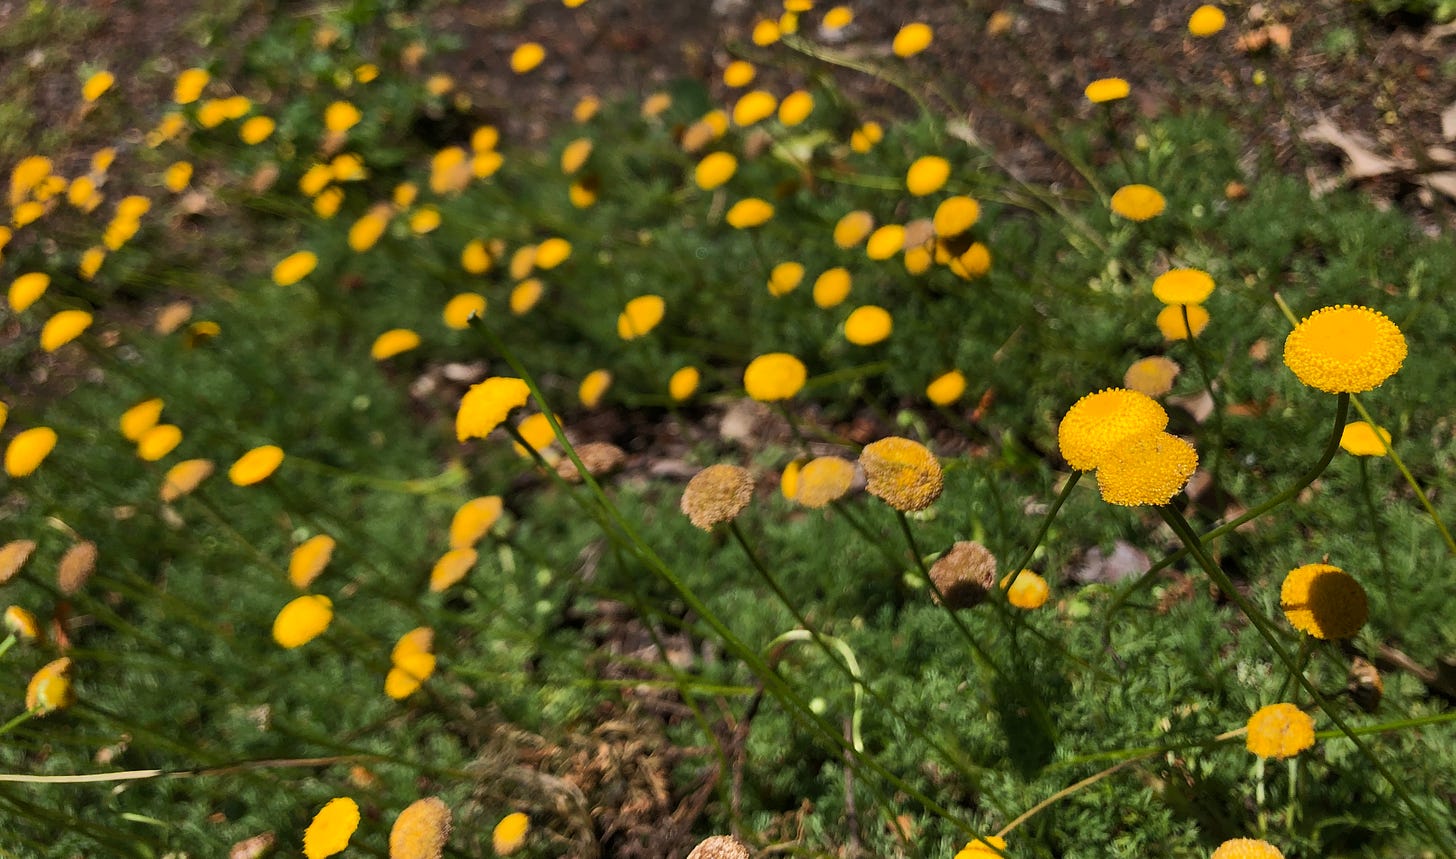 a small field of yellow button flowers—only a few in focus, with patchy green grass underneath